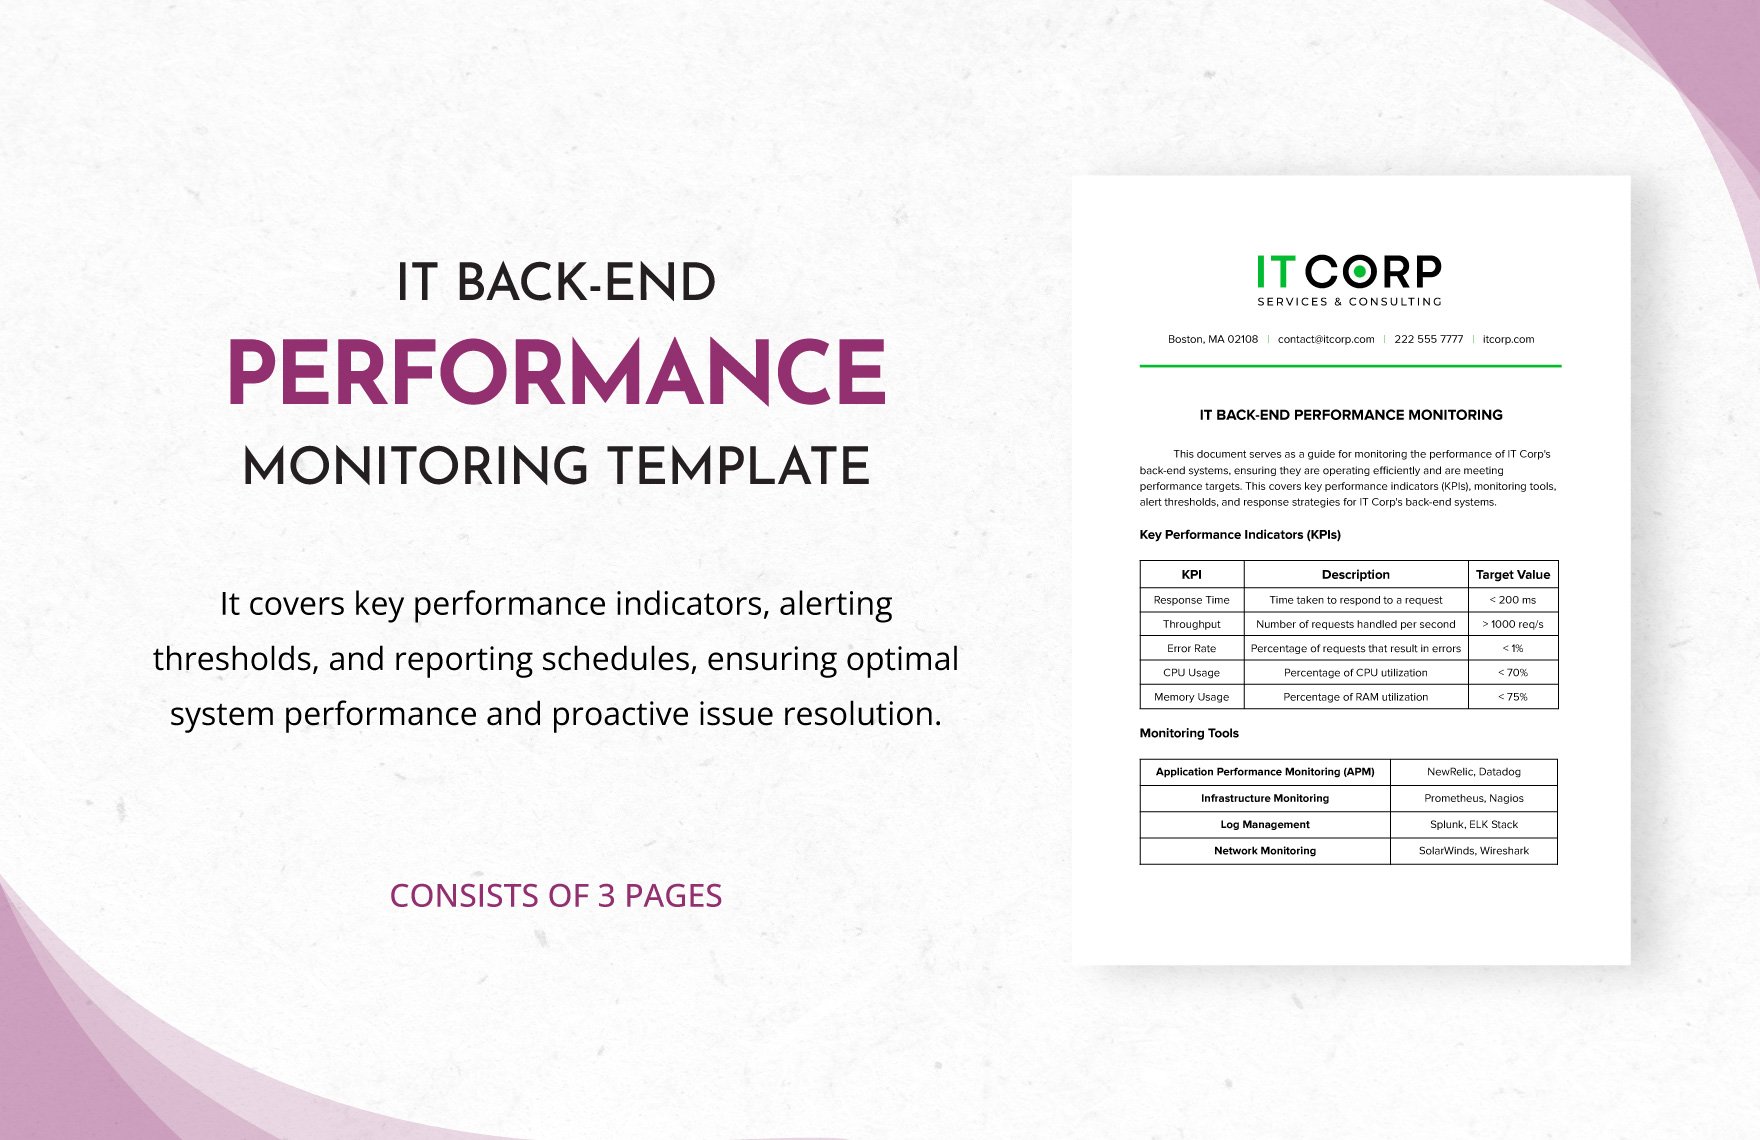 IT Back-End Performance Monitoring Template